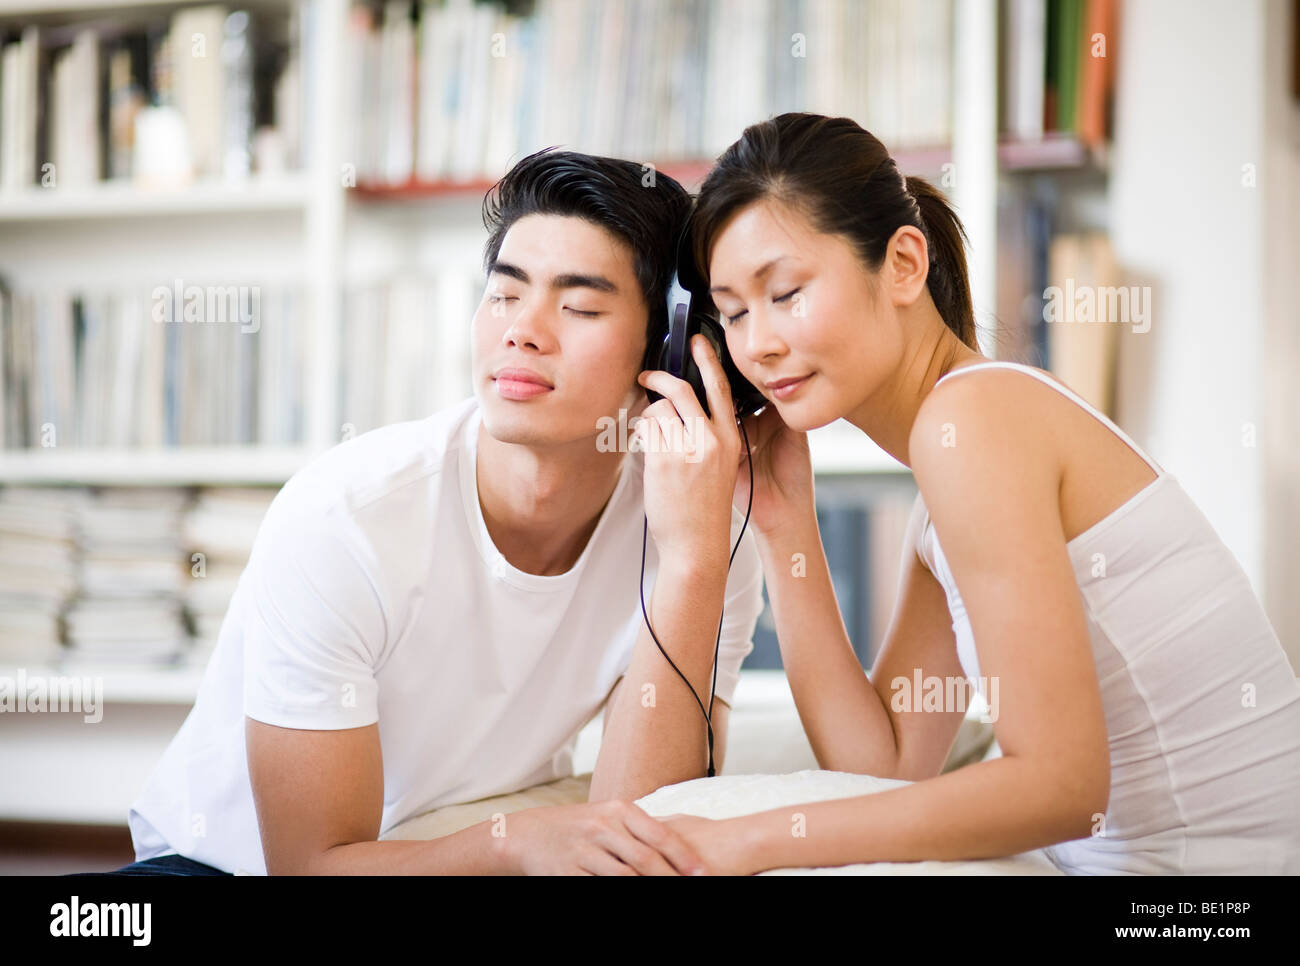 Asian couple listening to music together with headphones Stock Photo